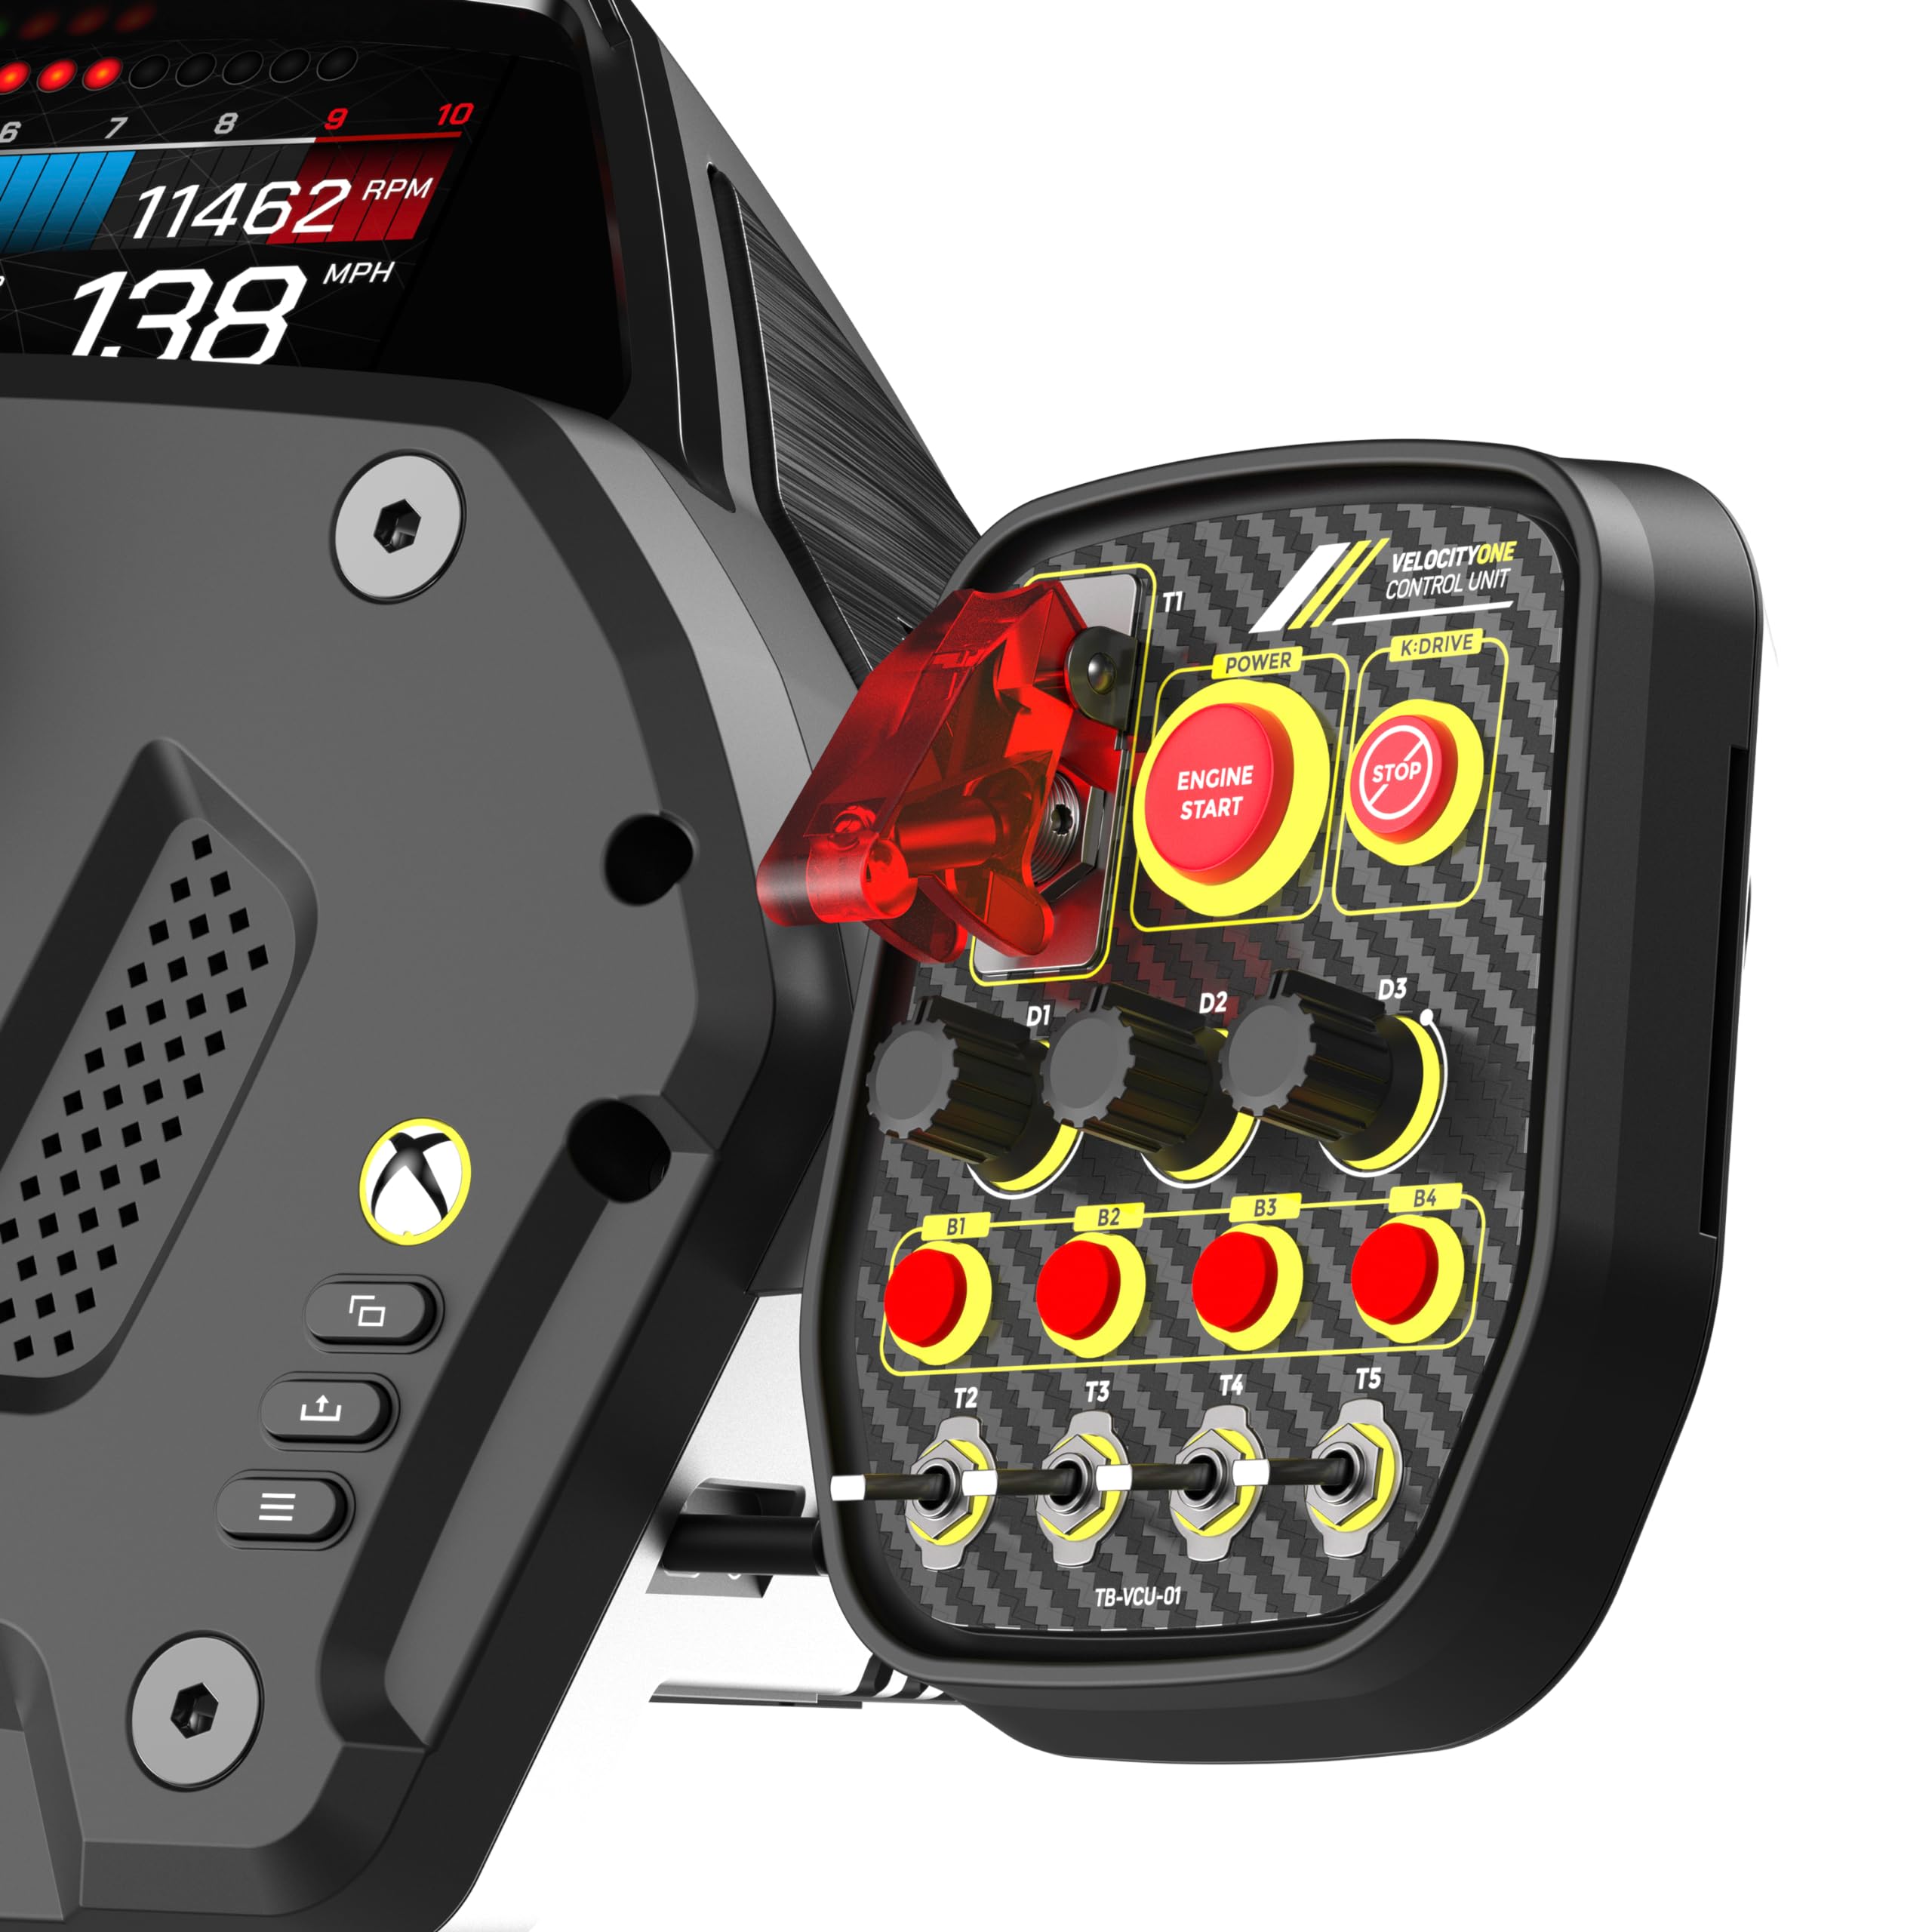 Turtle Beach VelocityOne Race Wheel & Pedal System Licensed for Xbox Series X|S, Xbox One, Windows 10 & 11 PCs – Force Feedback, Three Pedals & Magnetic Paddle Shifters, Hall Effect Sensors